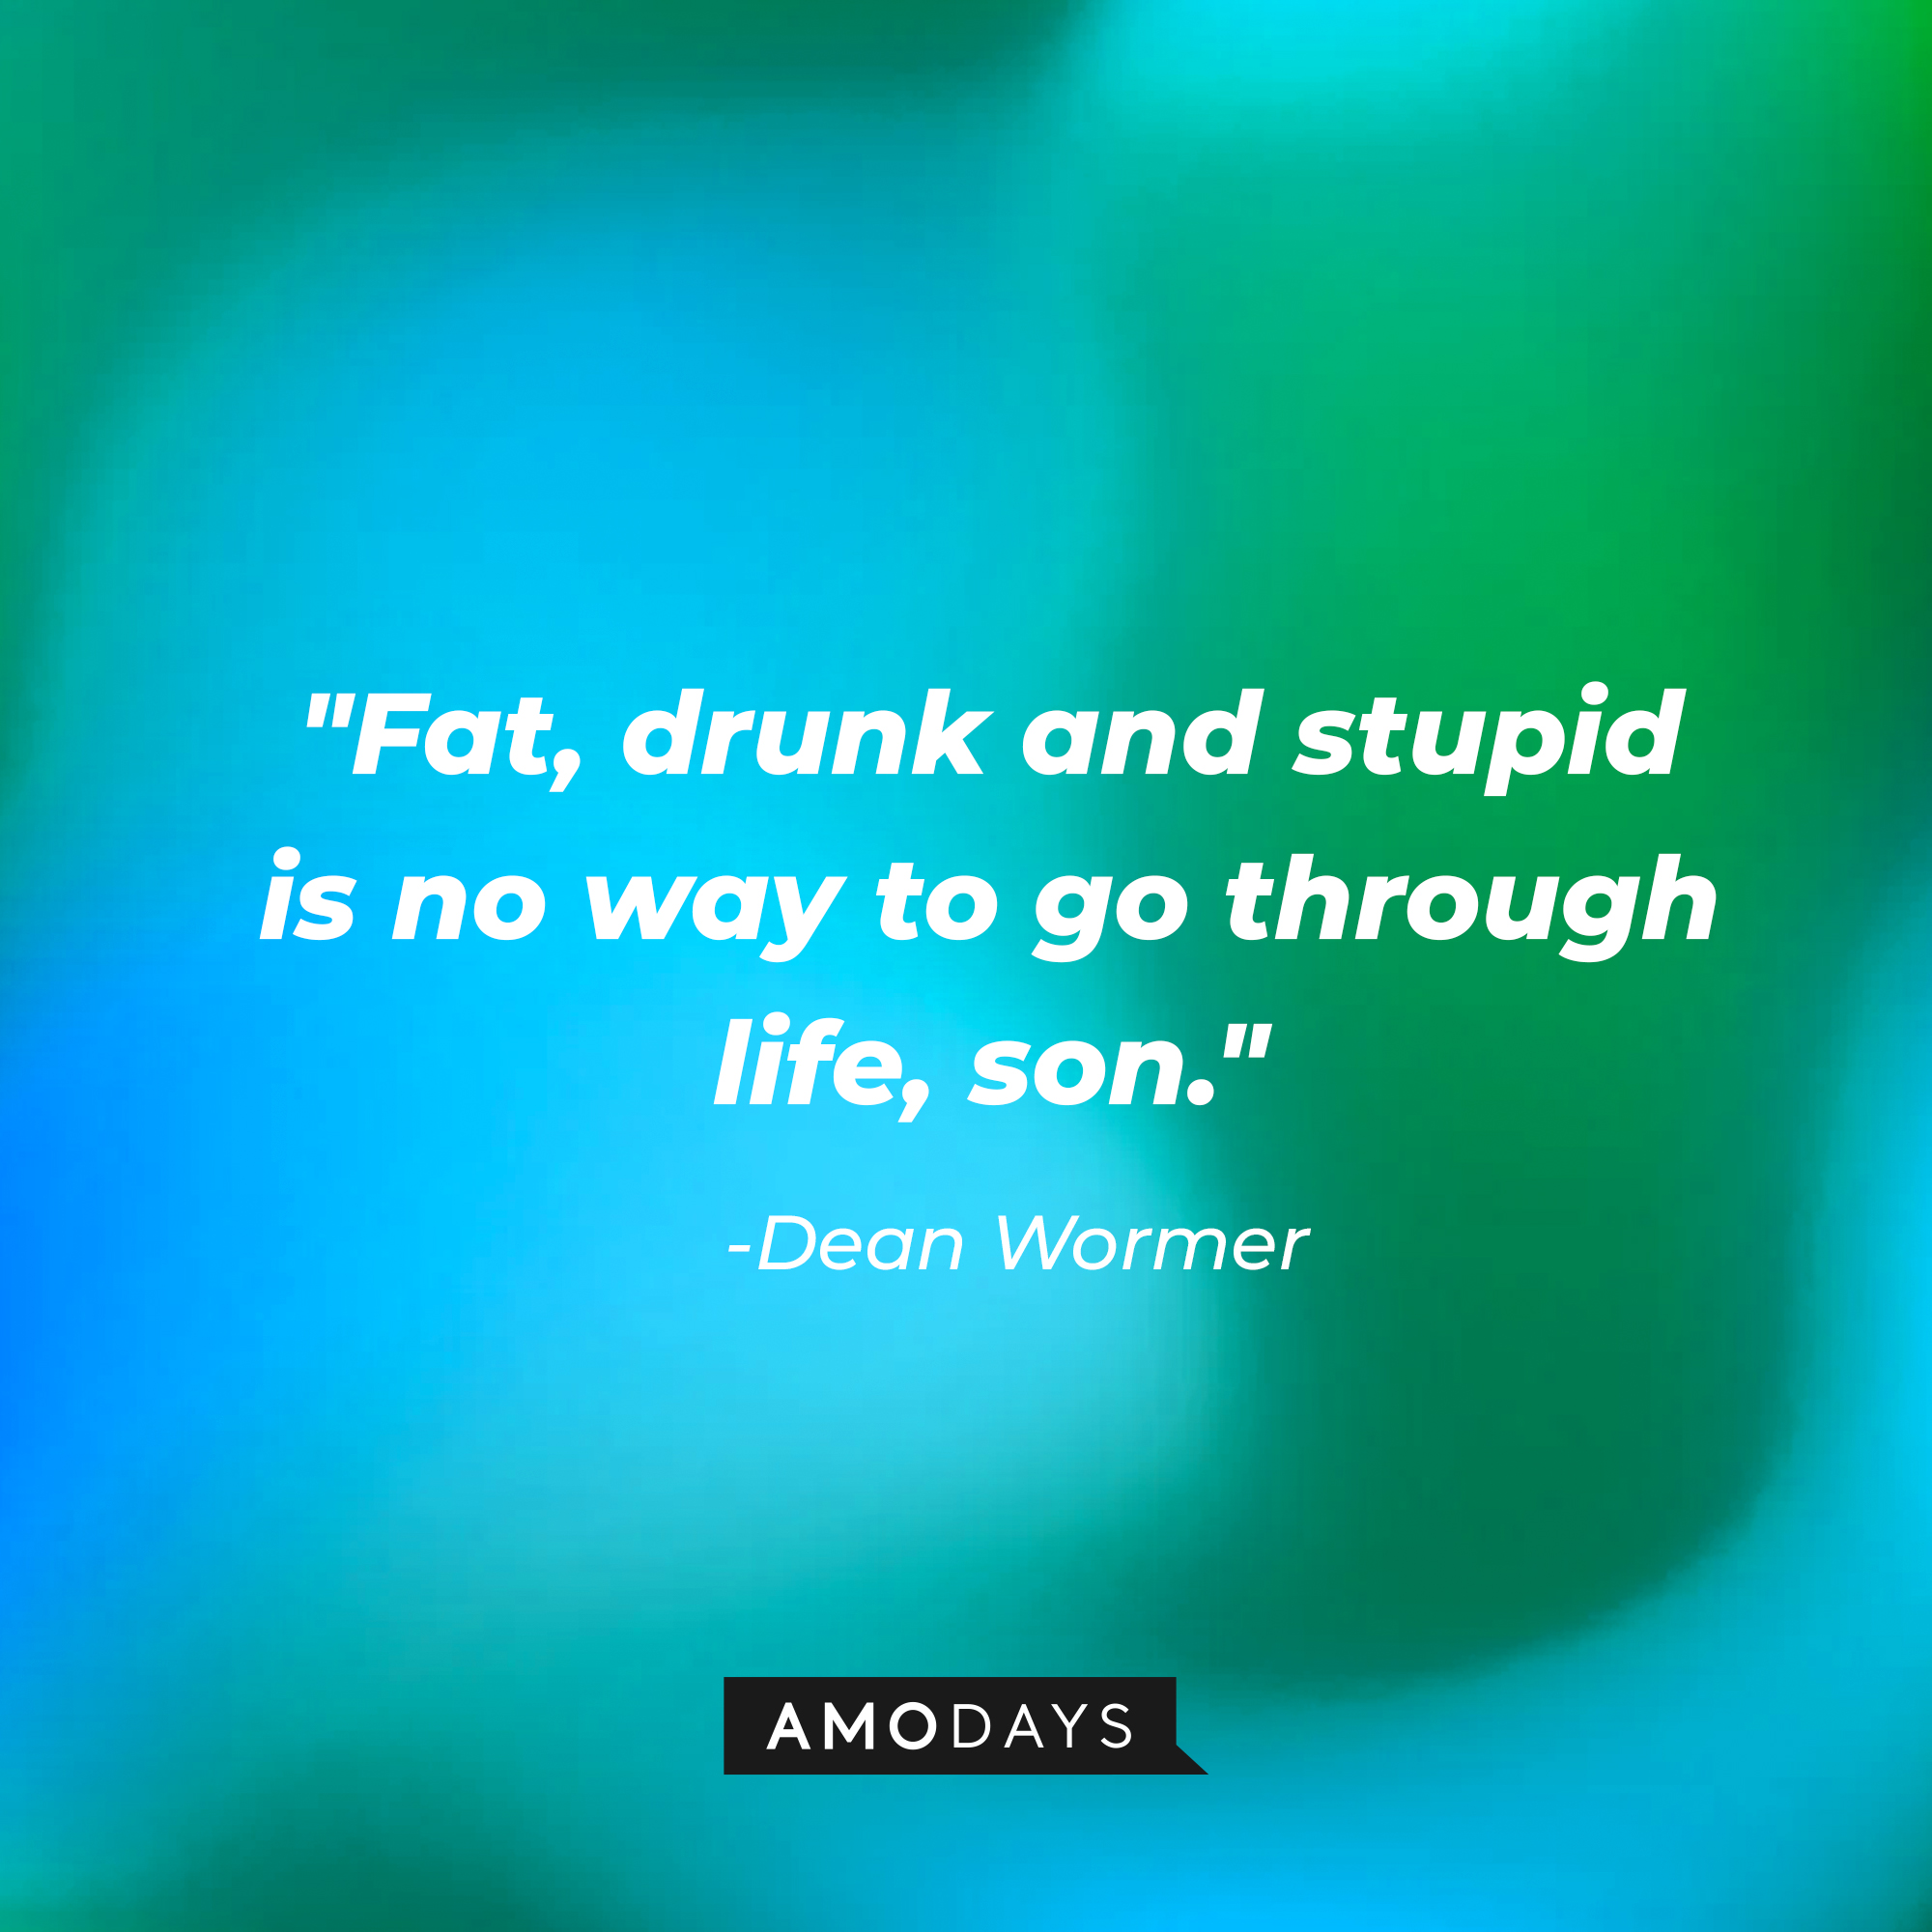 Dean Wormer's quote: "Fat, drunk and stupid is no way to go through life, son." | Source: Amodays